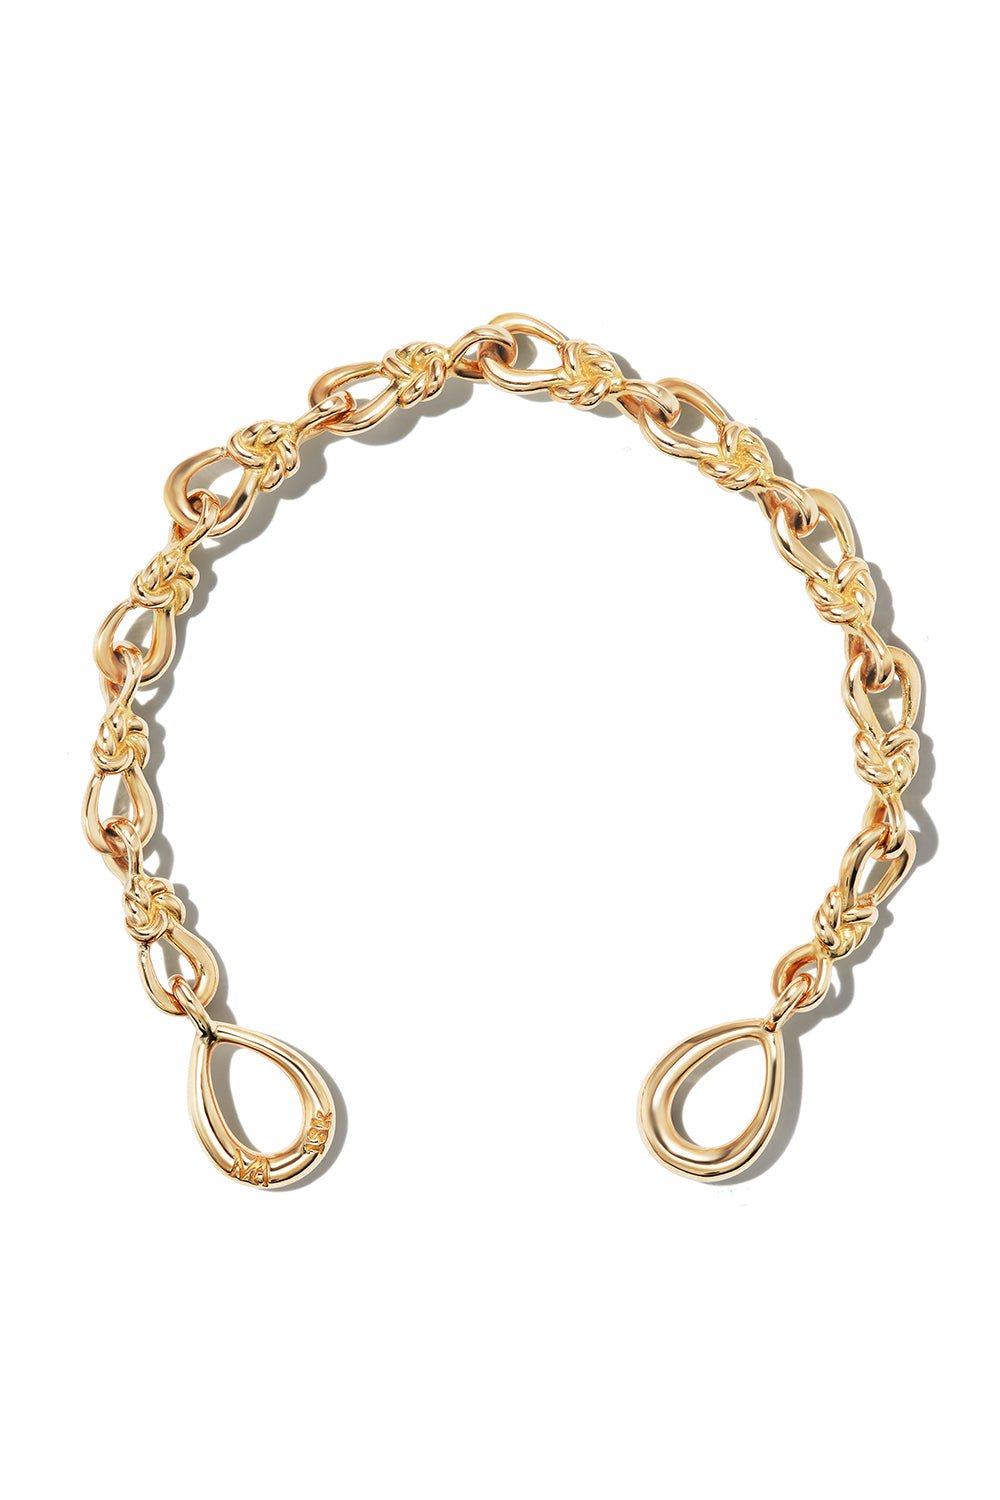 MARLA AARON-Large True Lover's Knot Bracelet Chain-YELLOW GOLD